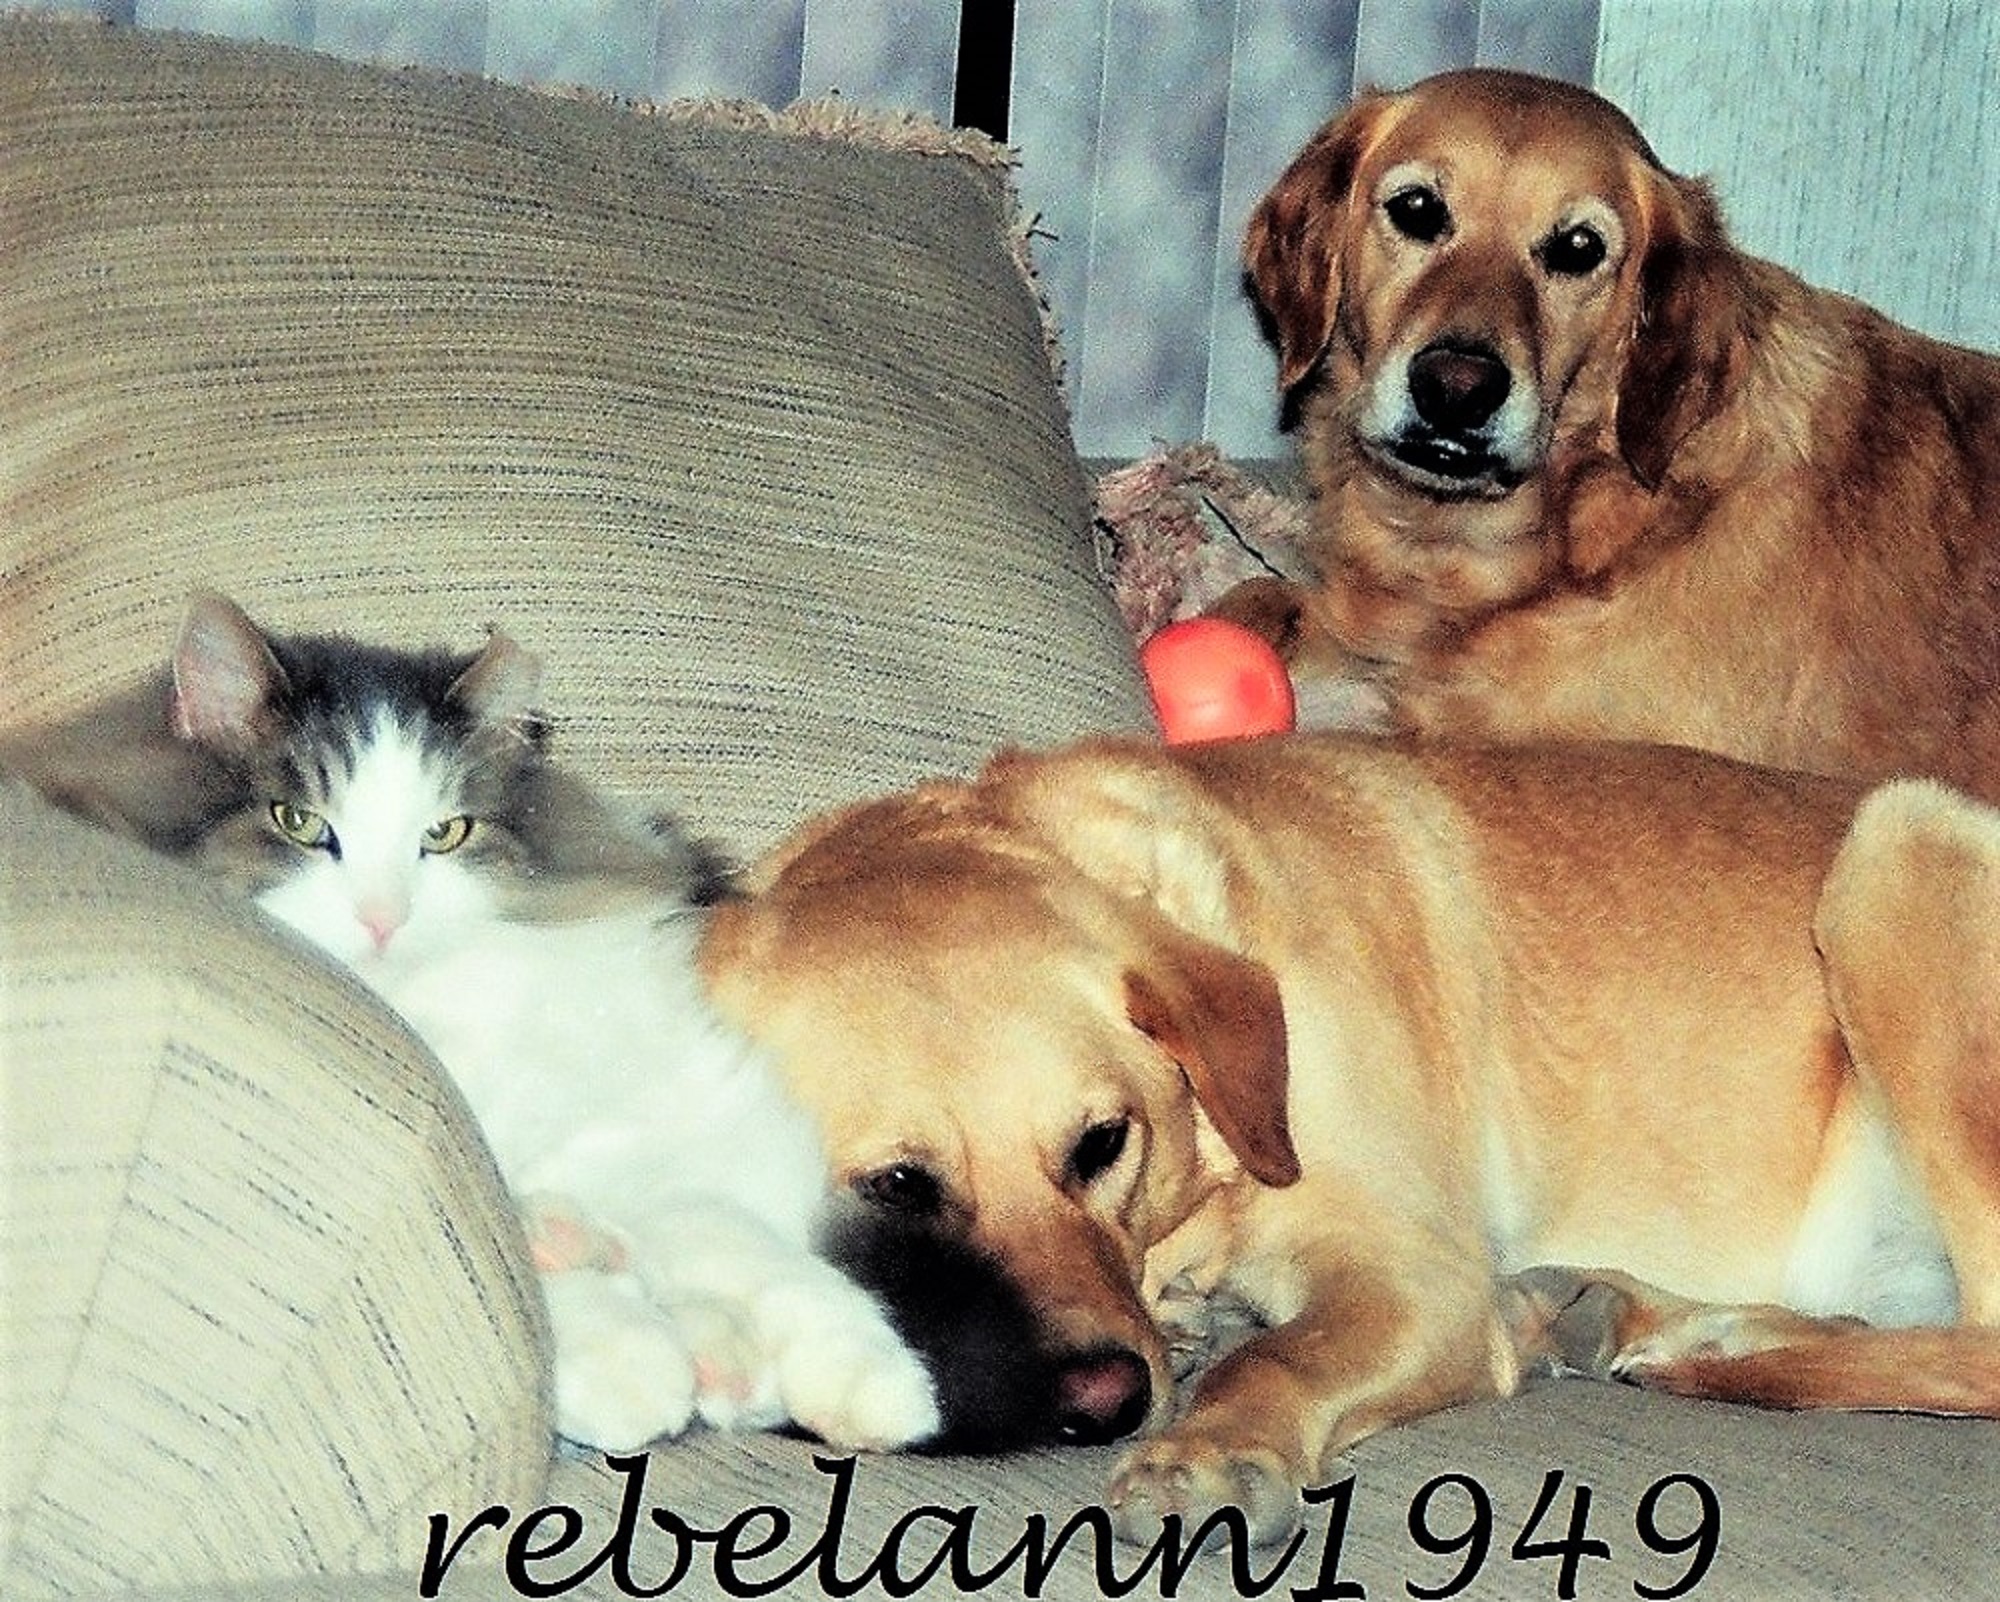 Spunky, my maine coon mix, Sophie and Gracie, my Golden Retriever. I took this shot in the either 1999 or 2000. 